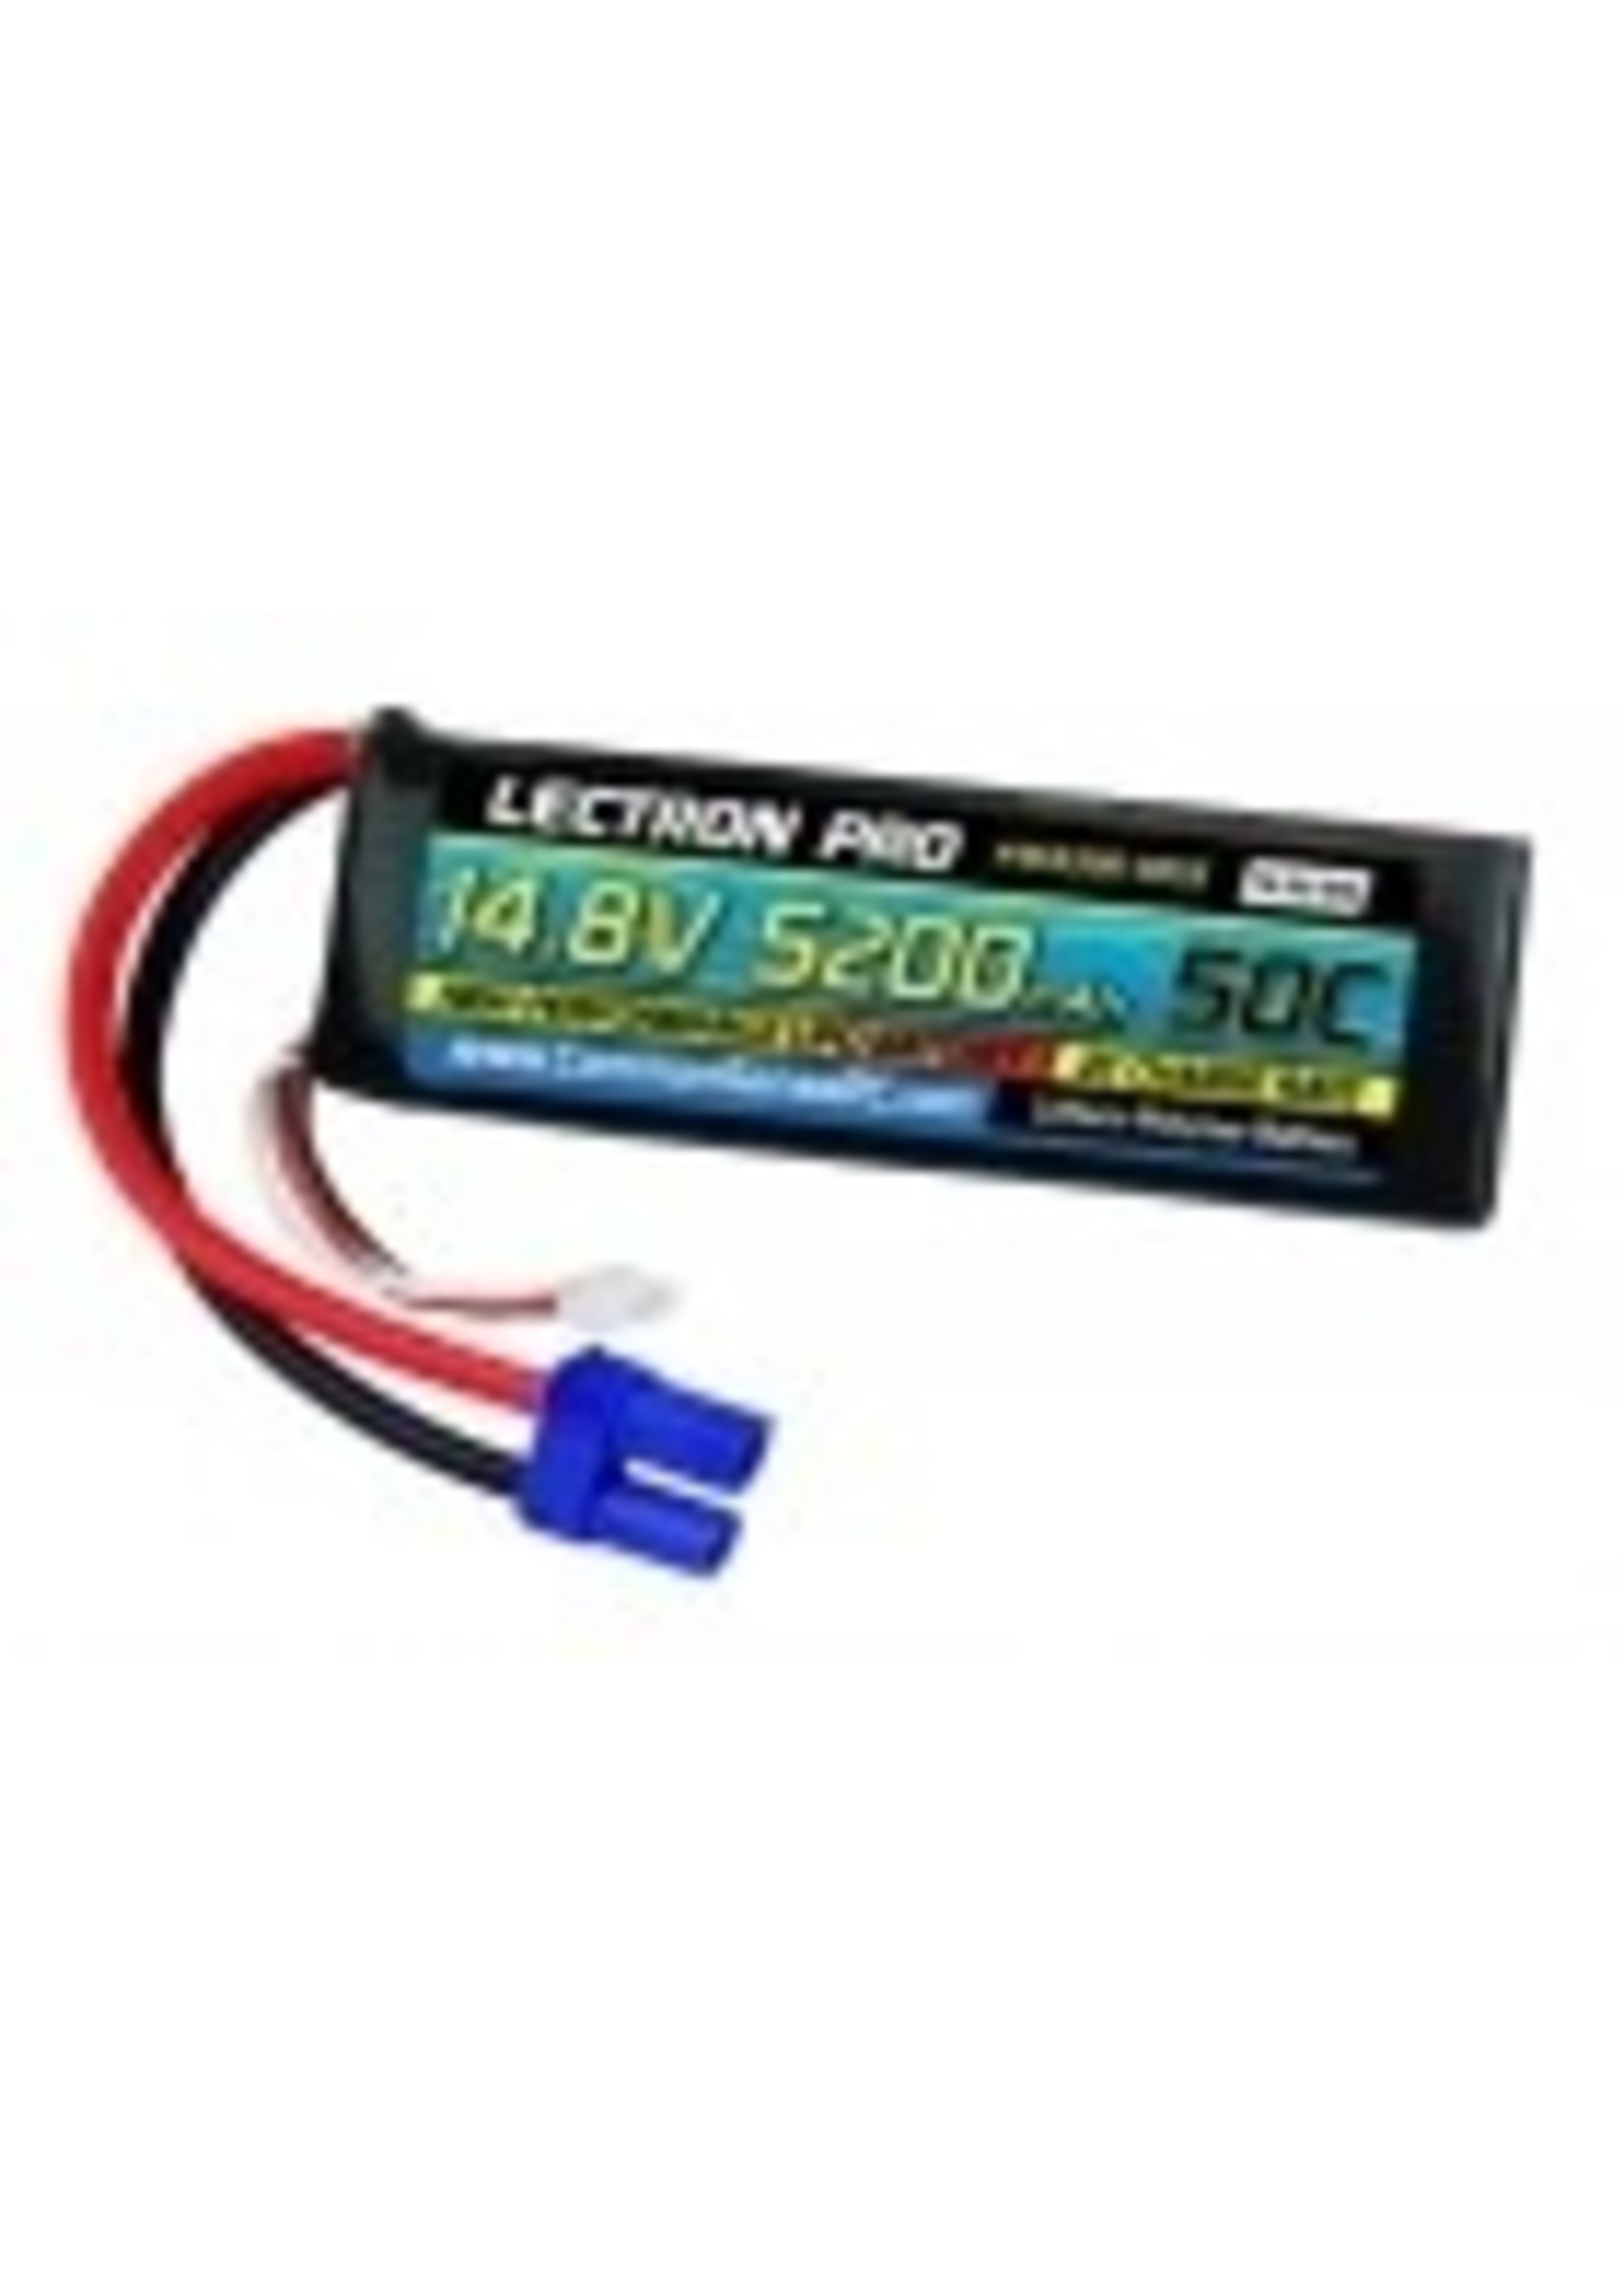 Common sense rc 4S4200-50S5 Lectron Pro 14.8V 5200mAh 50C Lipo Battery Soft Pack with EC5 Connector